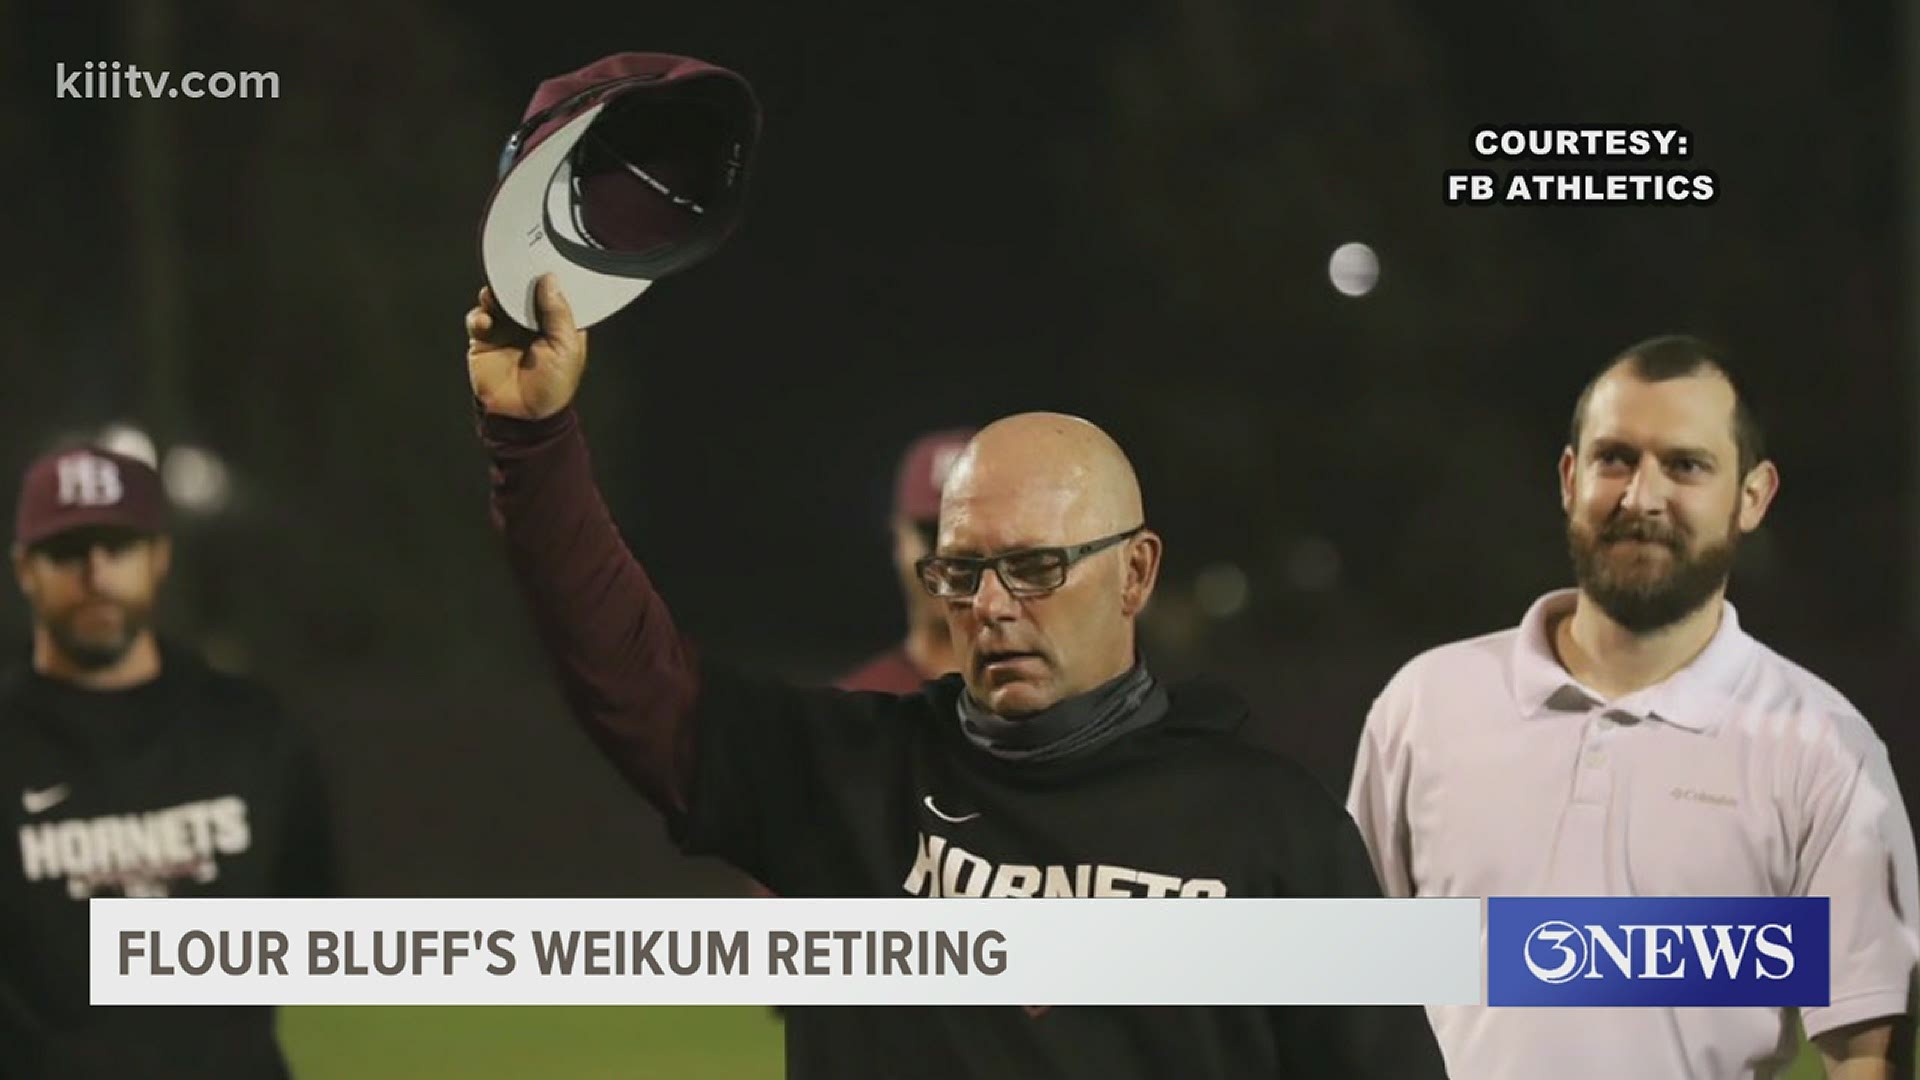 Weikum has been a coach in South Texas since the early 80's and has been a staple at Flour Bluff, serving two separate stints with the Hornets.